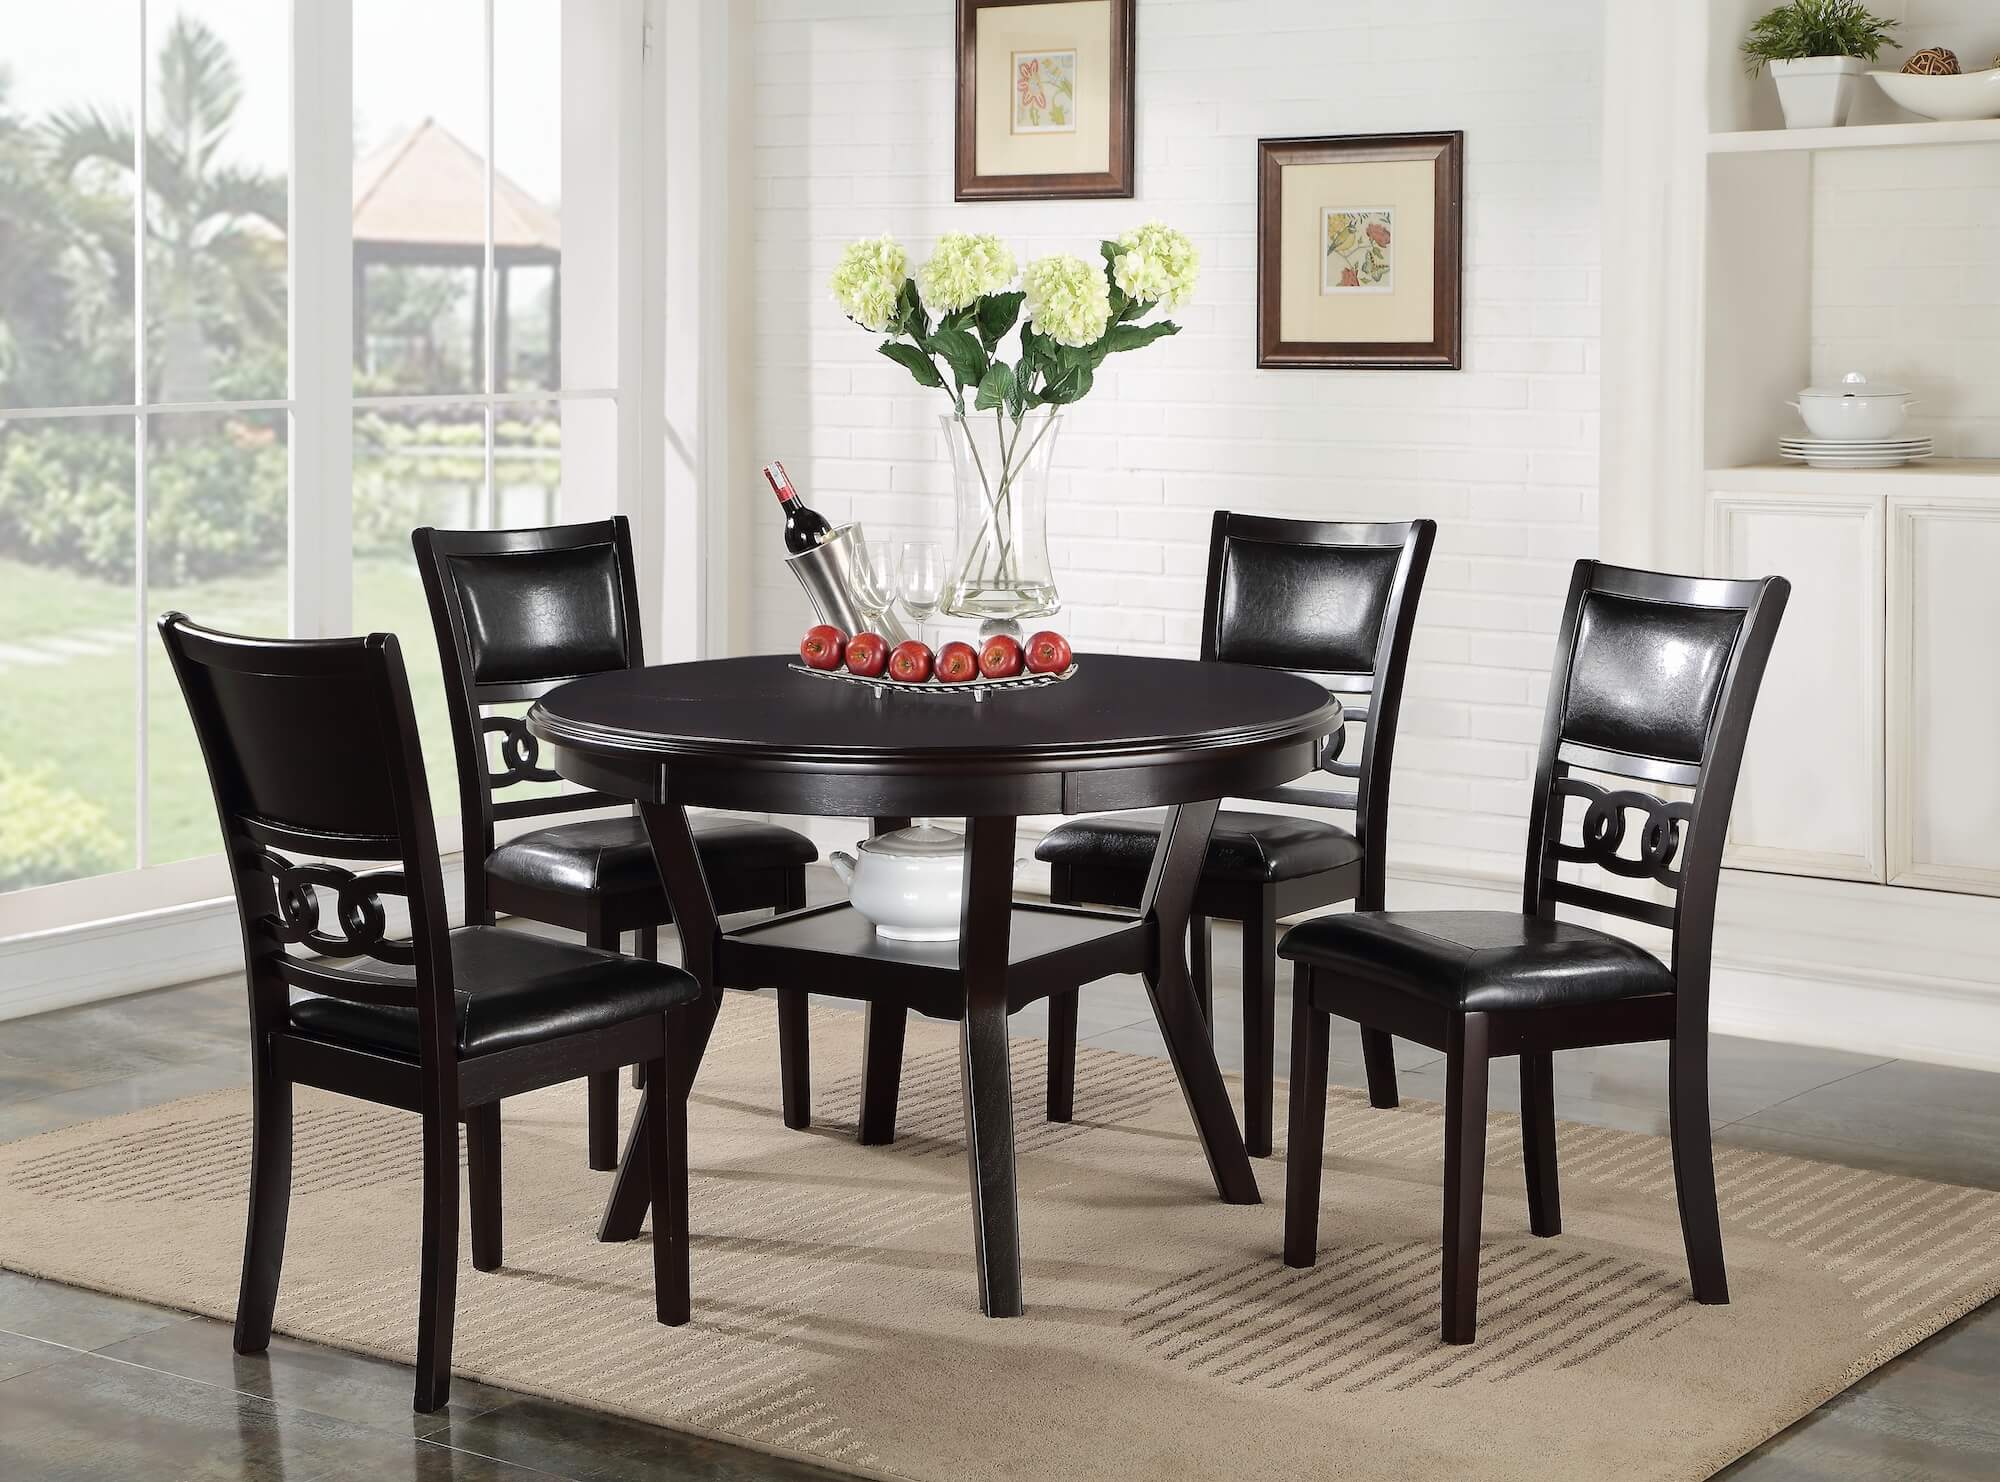 Gia Ebony 5 piece round table dining set by New Classic furniture product image